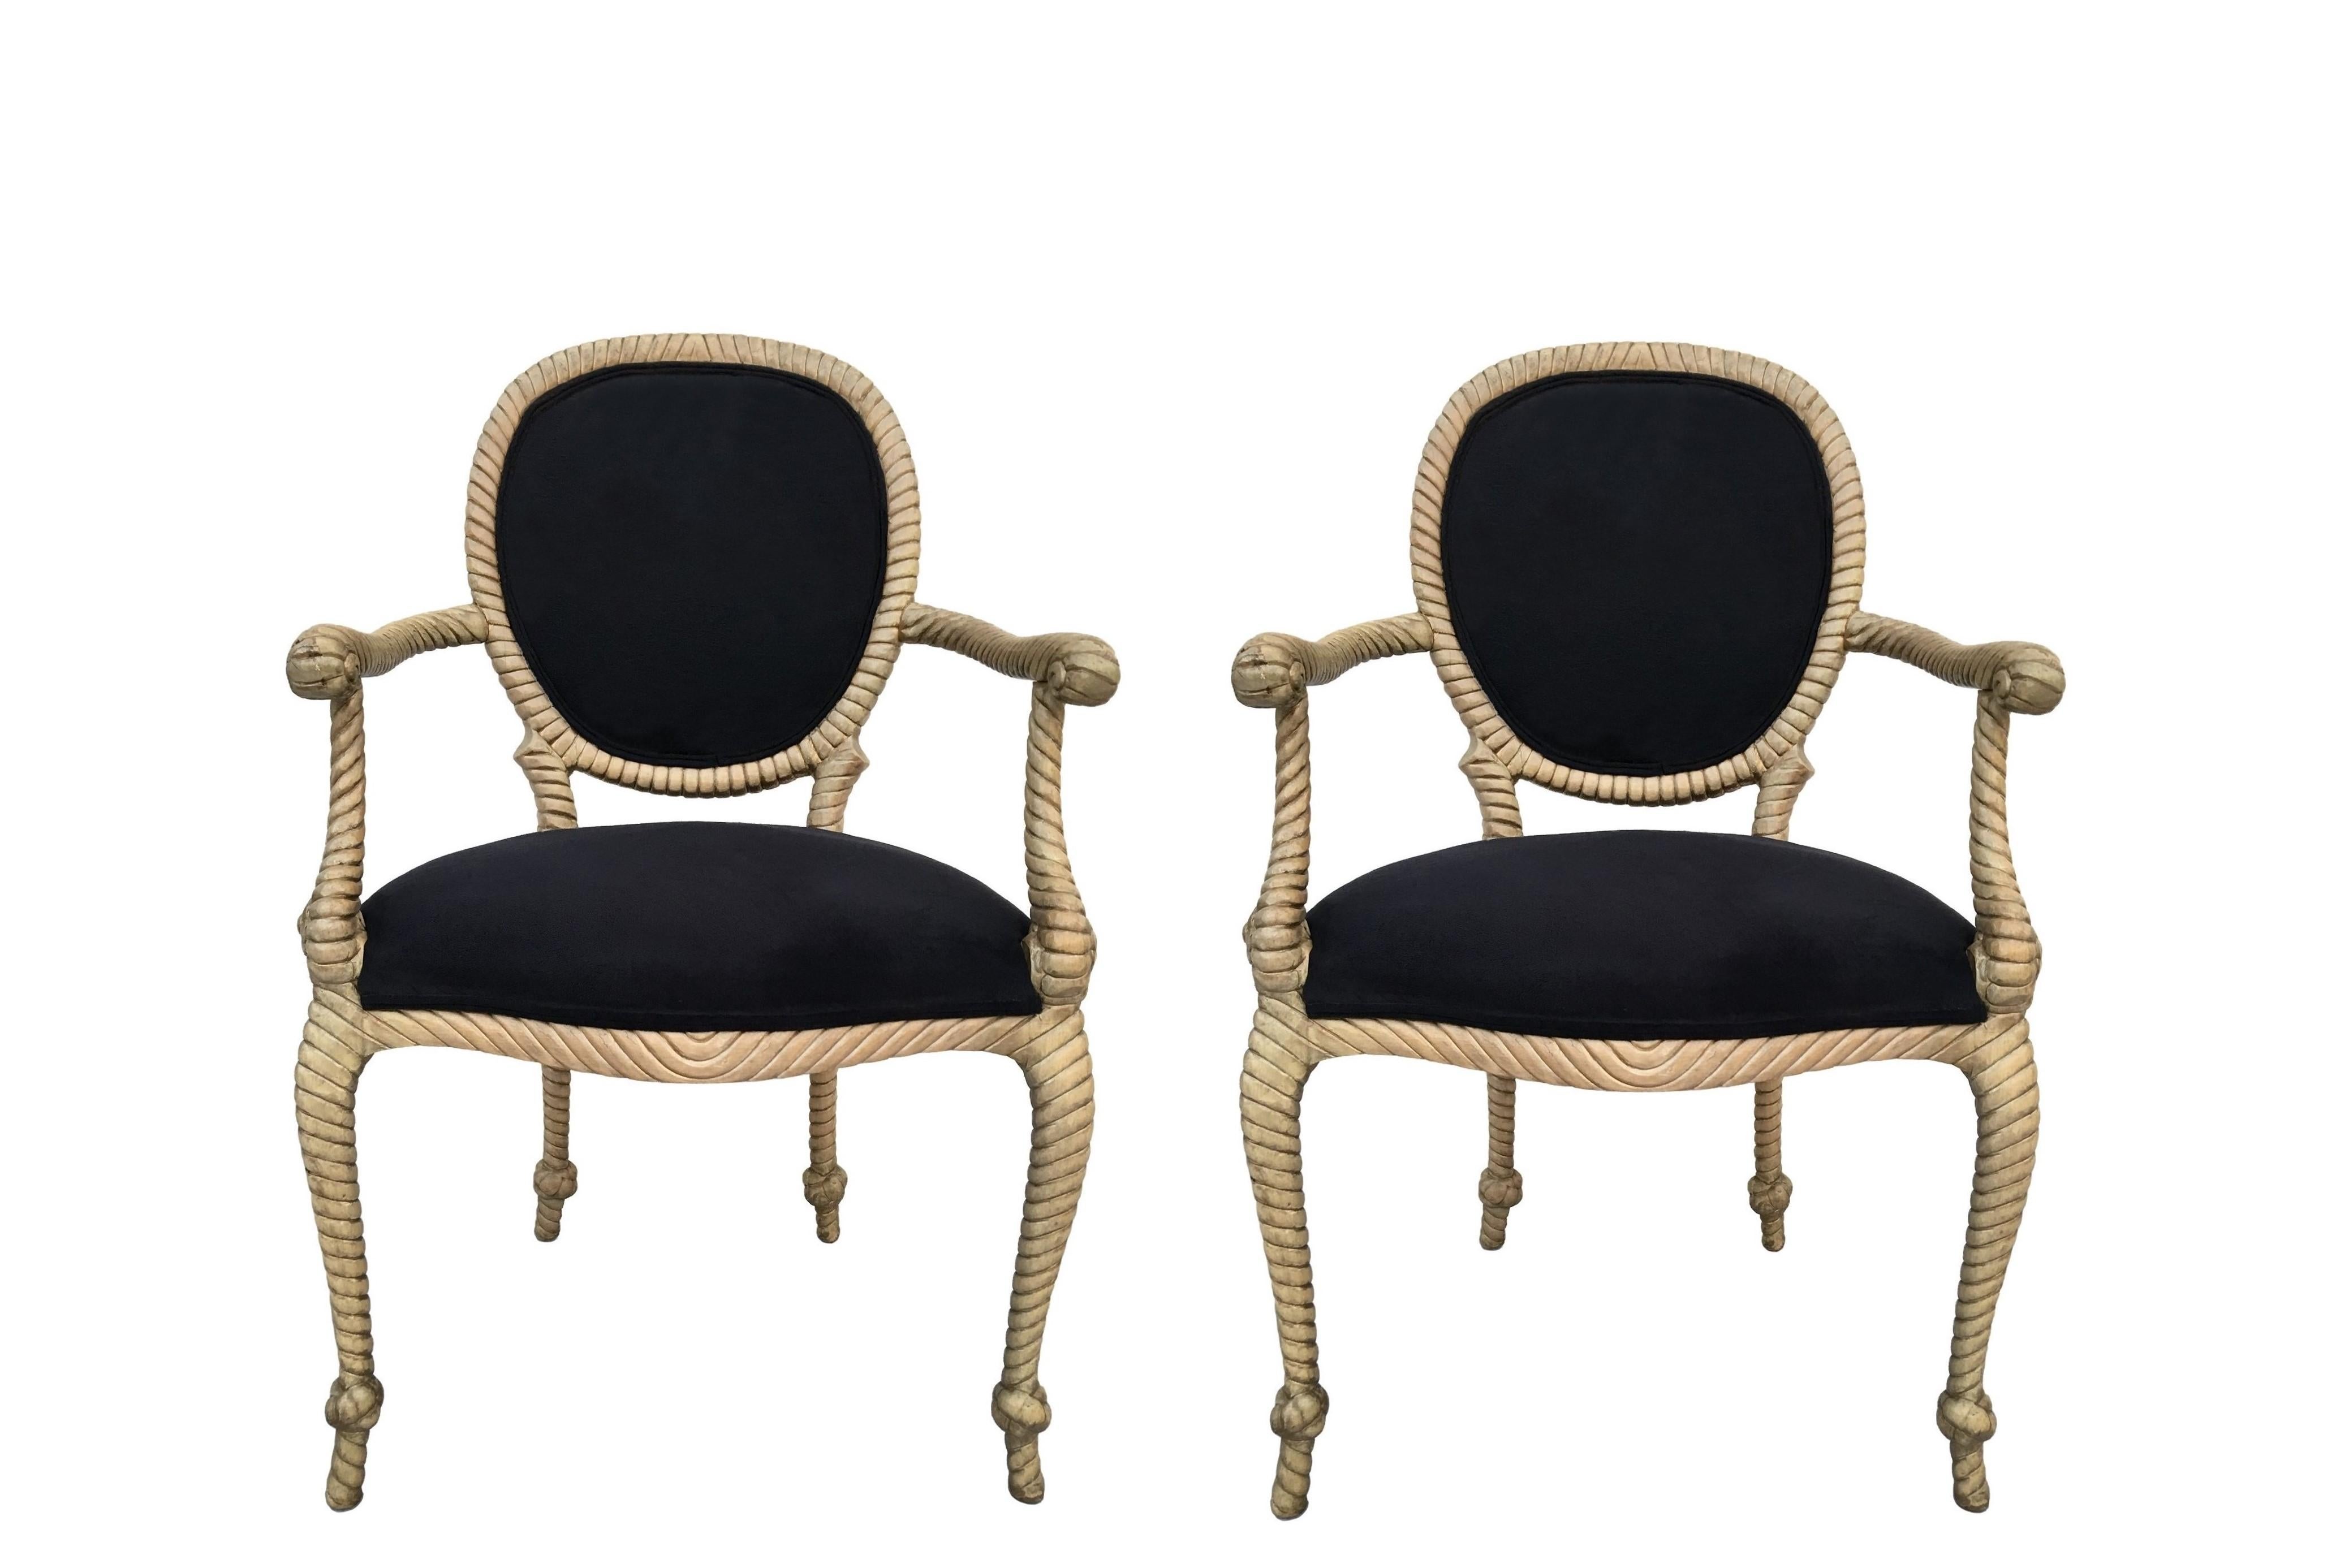 Vintage Napoleon III style dining chairs. Featured in a solid wood with a light white washed wood finish. Each having frames carved to resemble rope, with knots on arms and above each tassel foot, professionally upholstered rounded back and